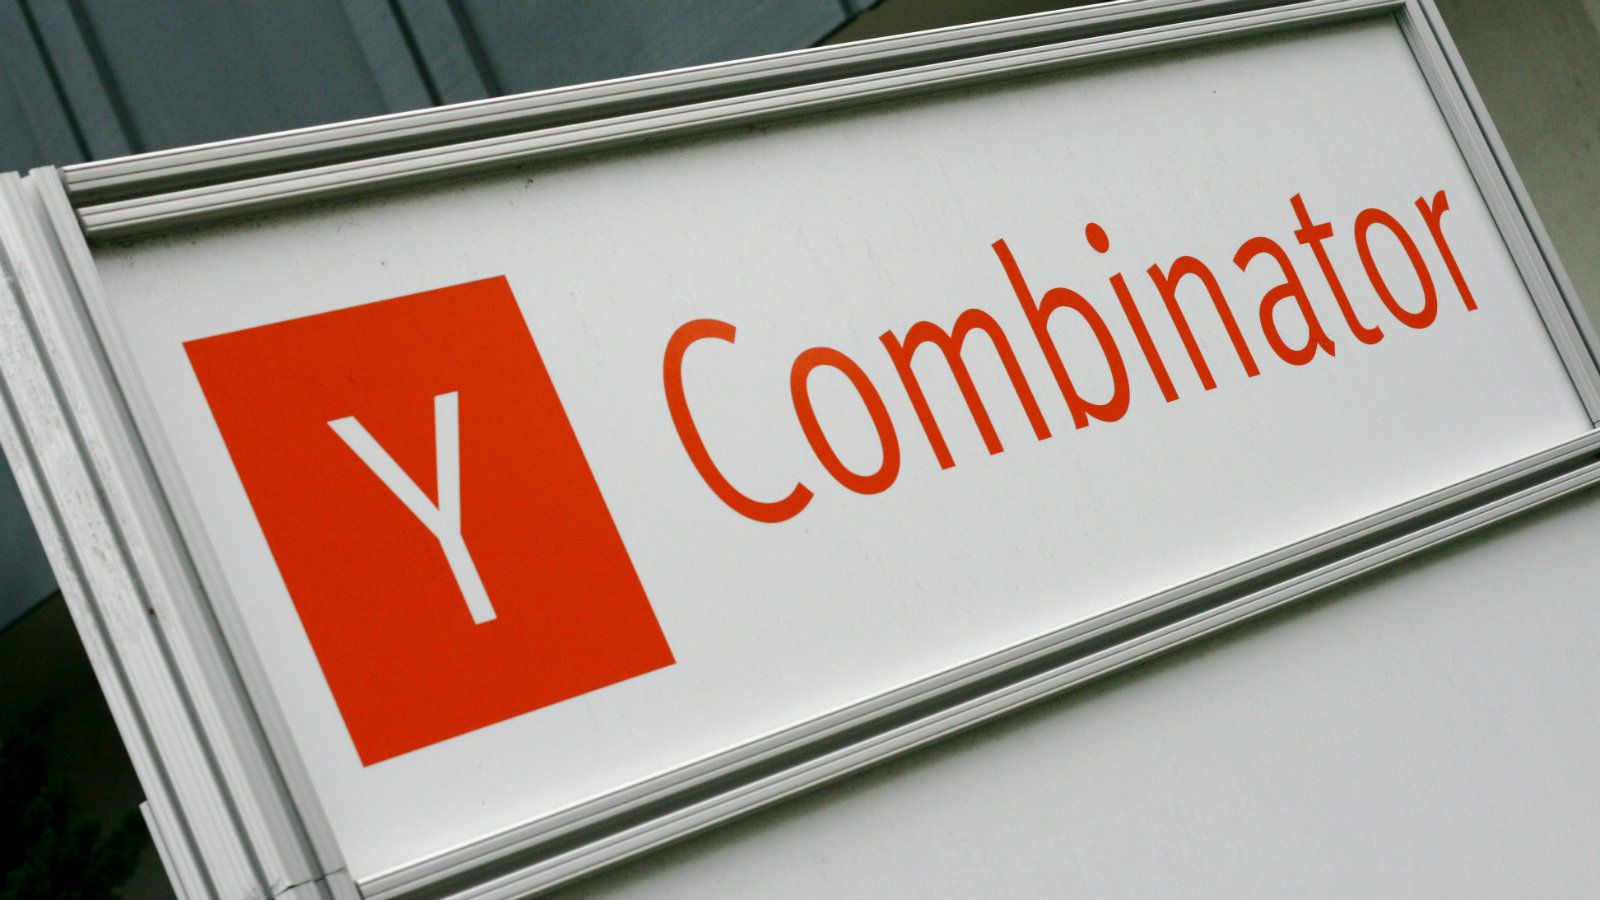 The seven Indian startups that made it to Y Combinator’s demo-day event this March